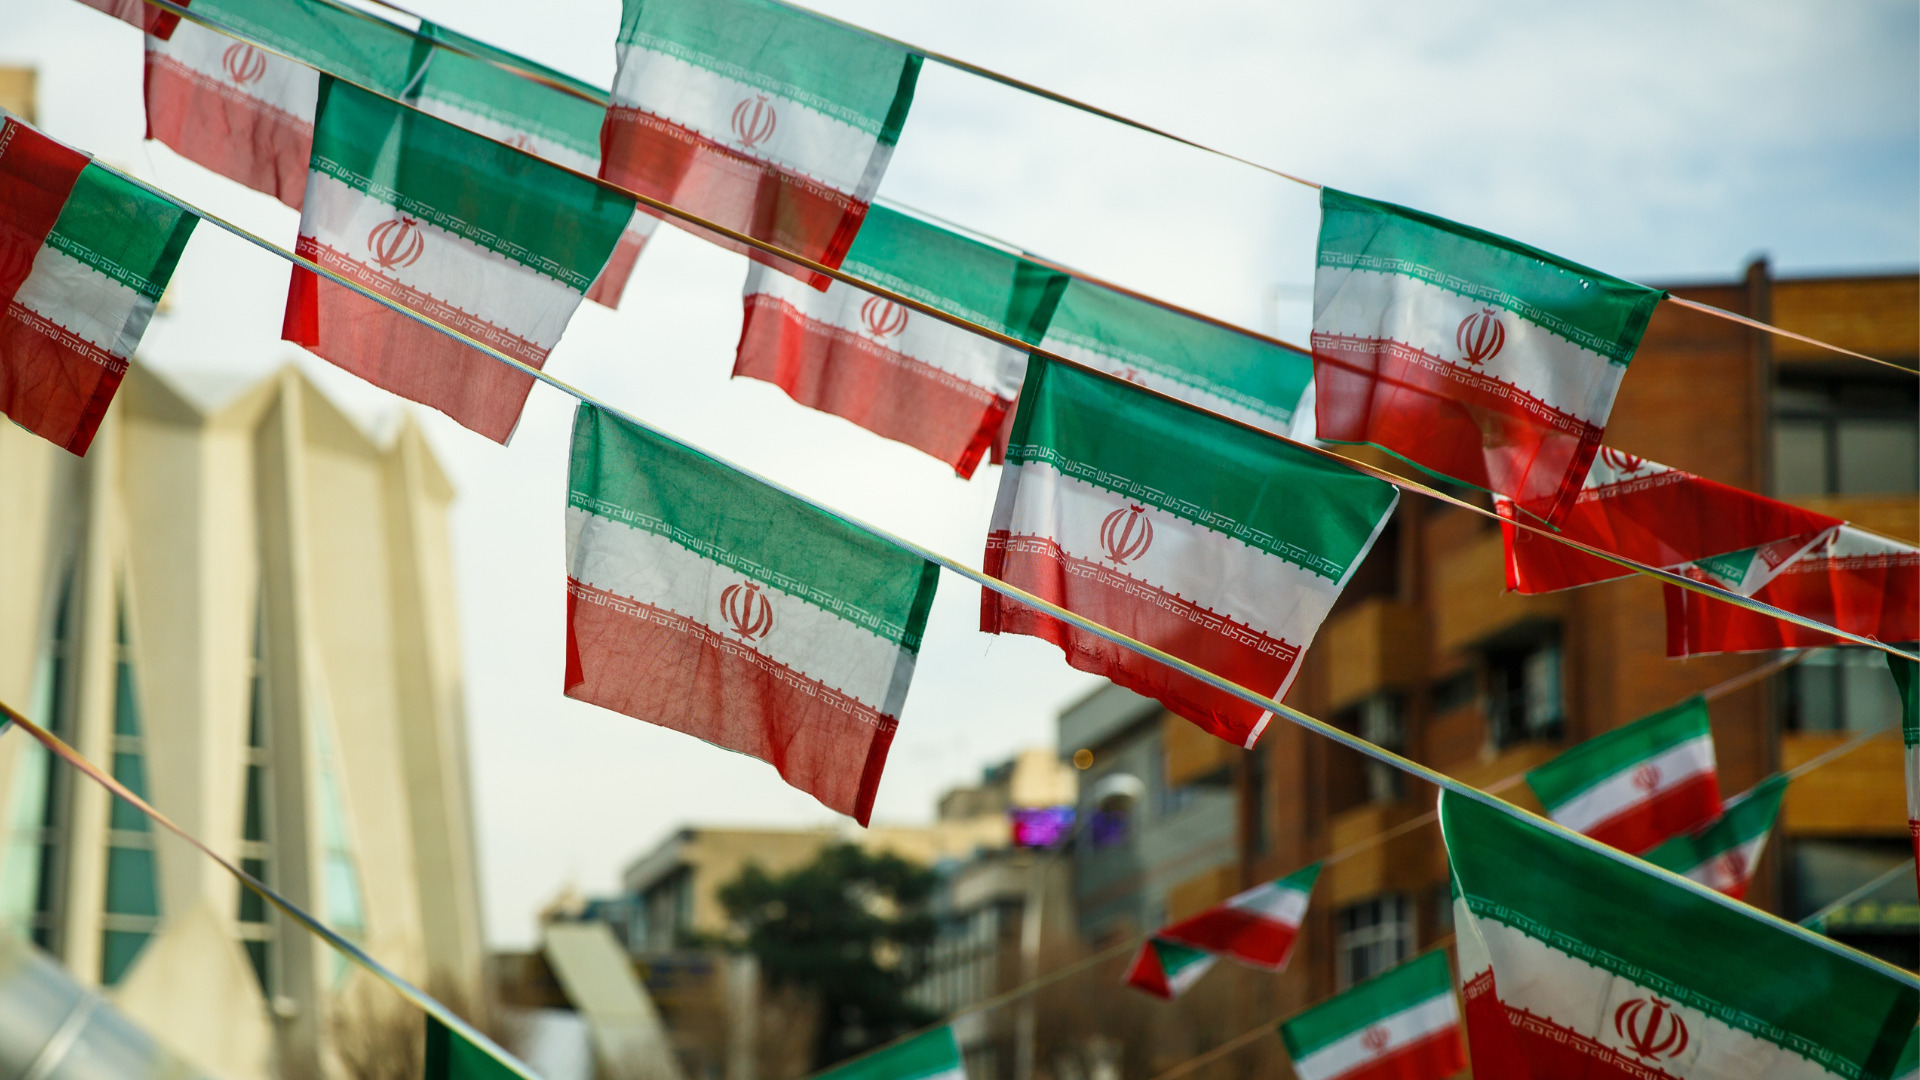 Iran: No end in sight